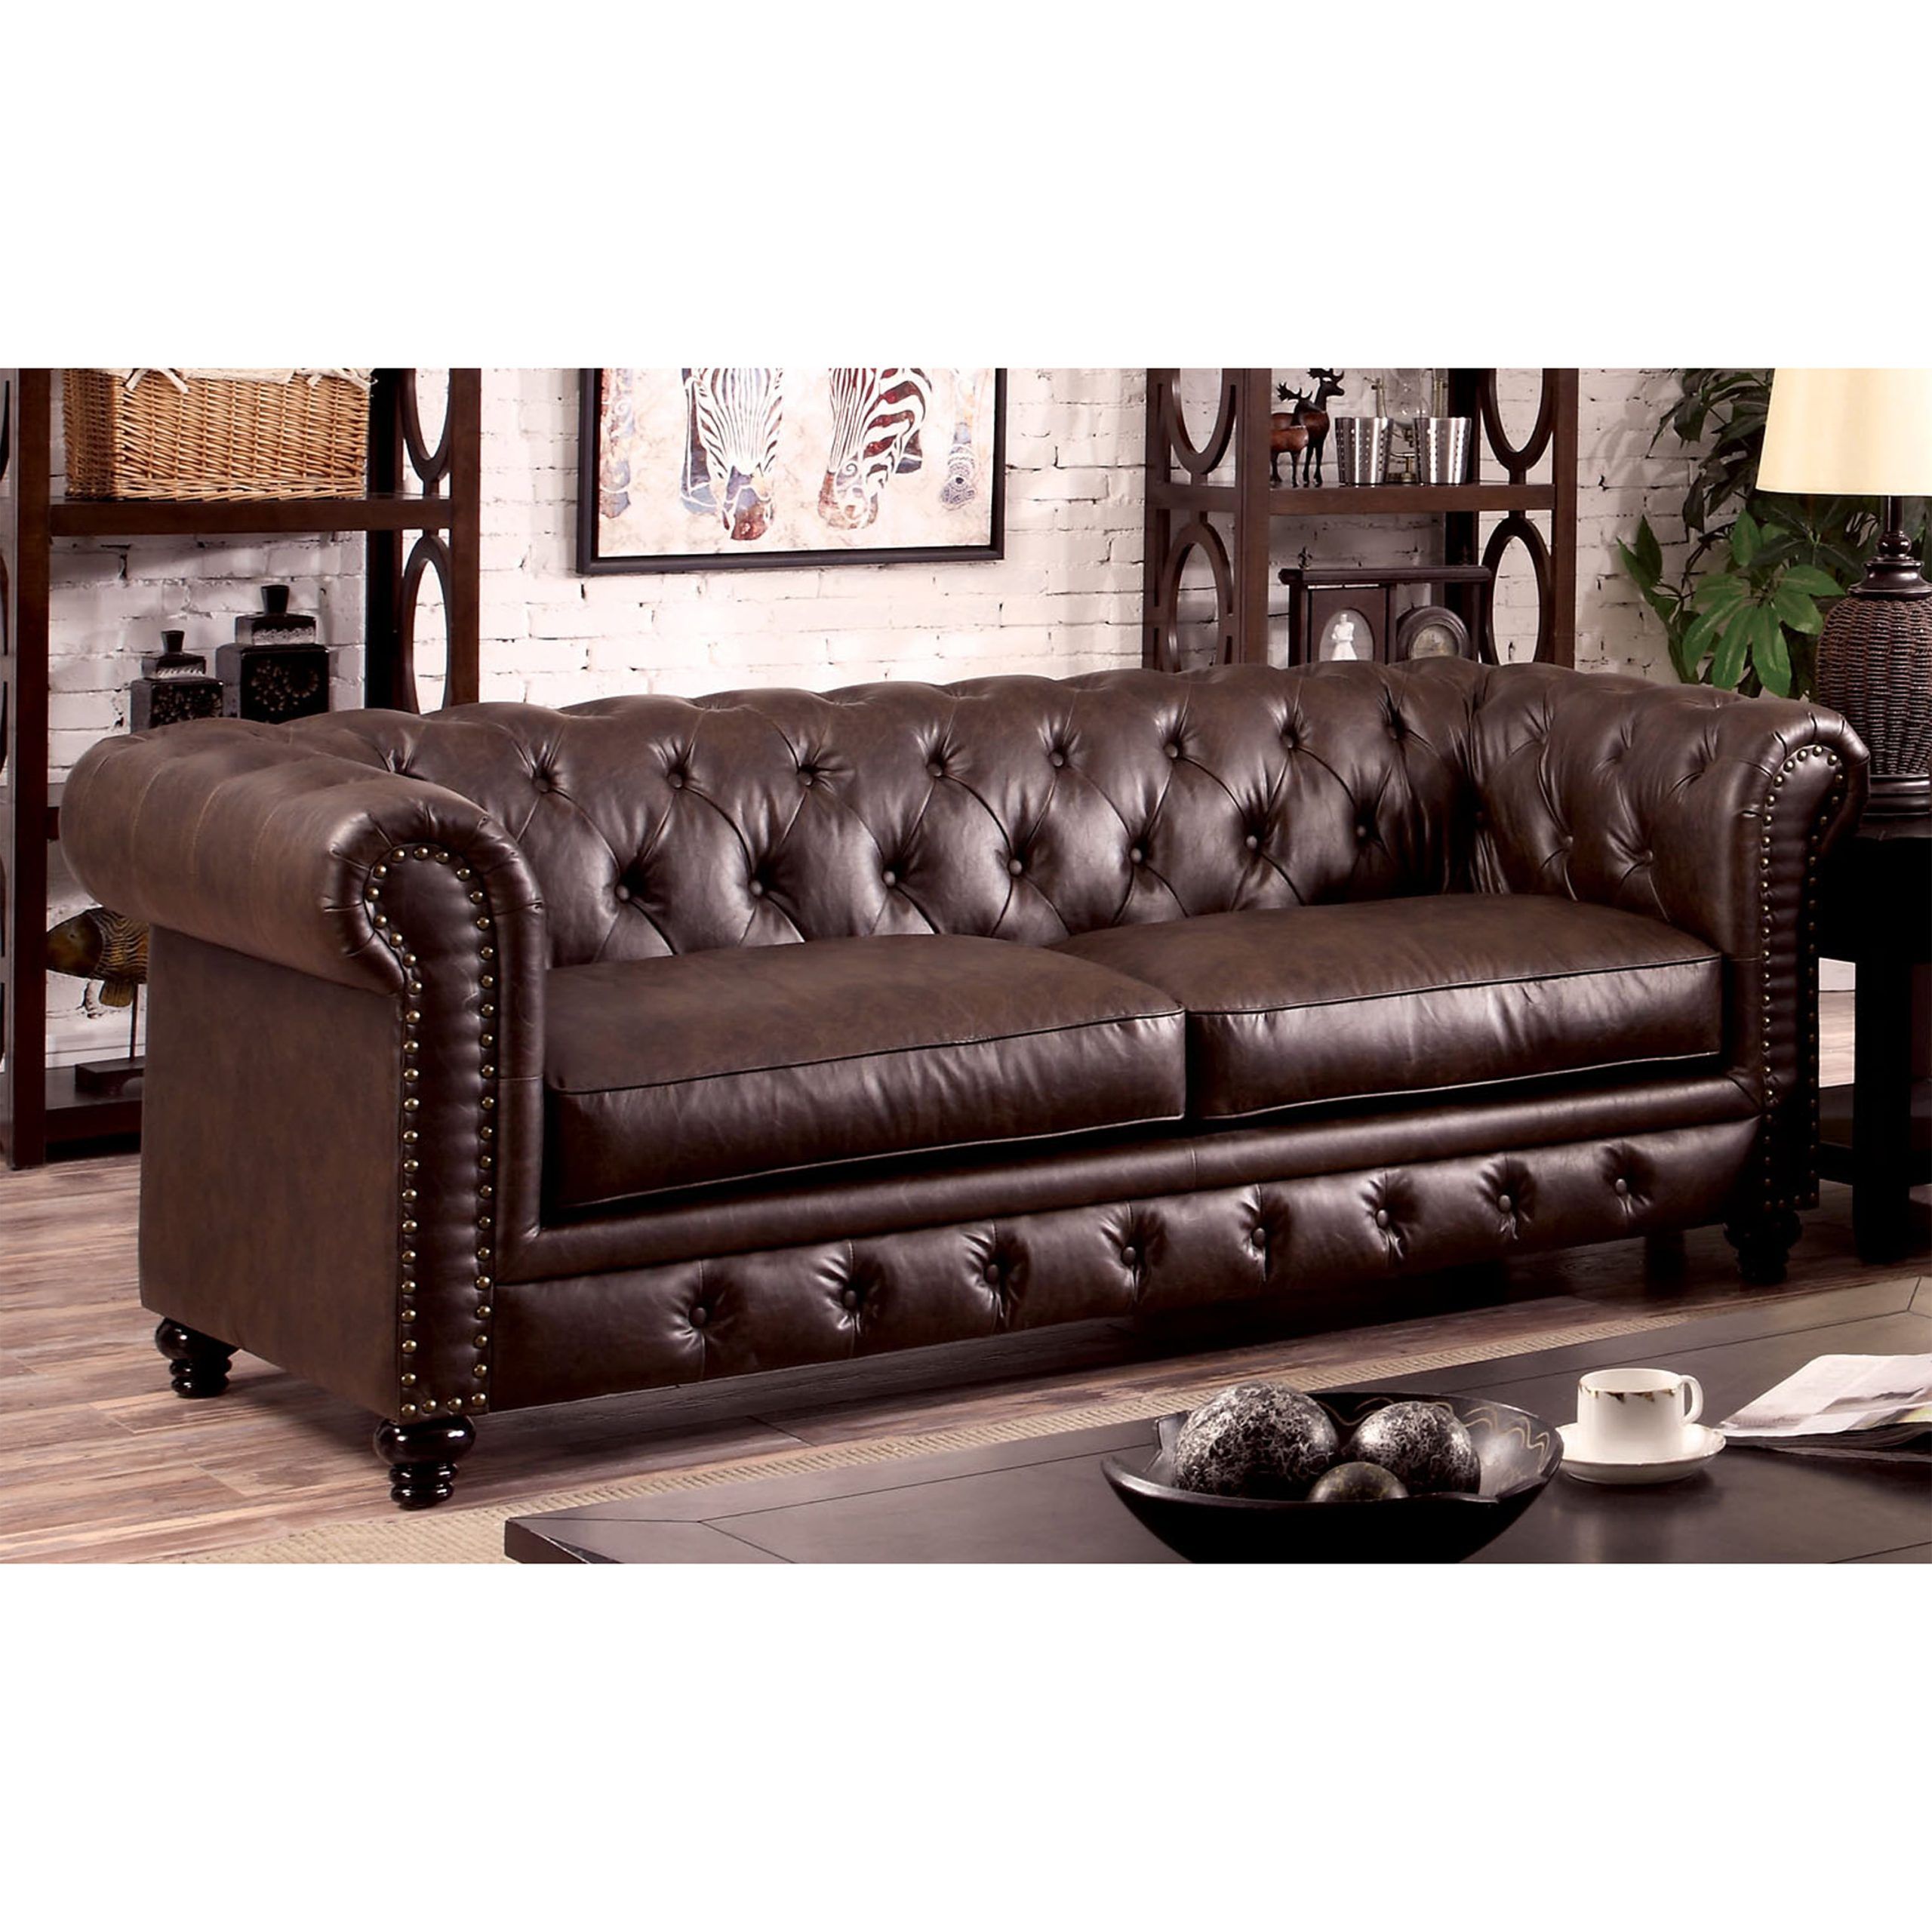 Furniture Of America Tufted Glam Faux Leather Nyssa Tuxedo Sofa, Brown Intended For Faux Leather Sofas In Chocolate Brown (View 8 of 20)